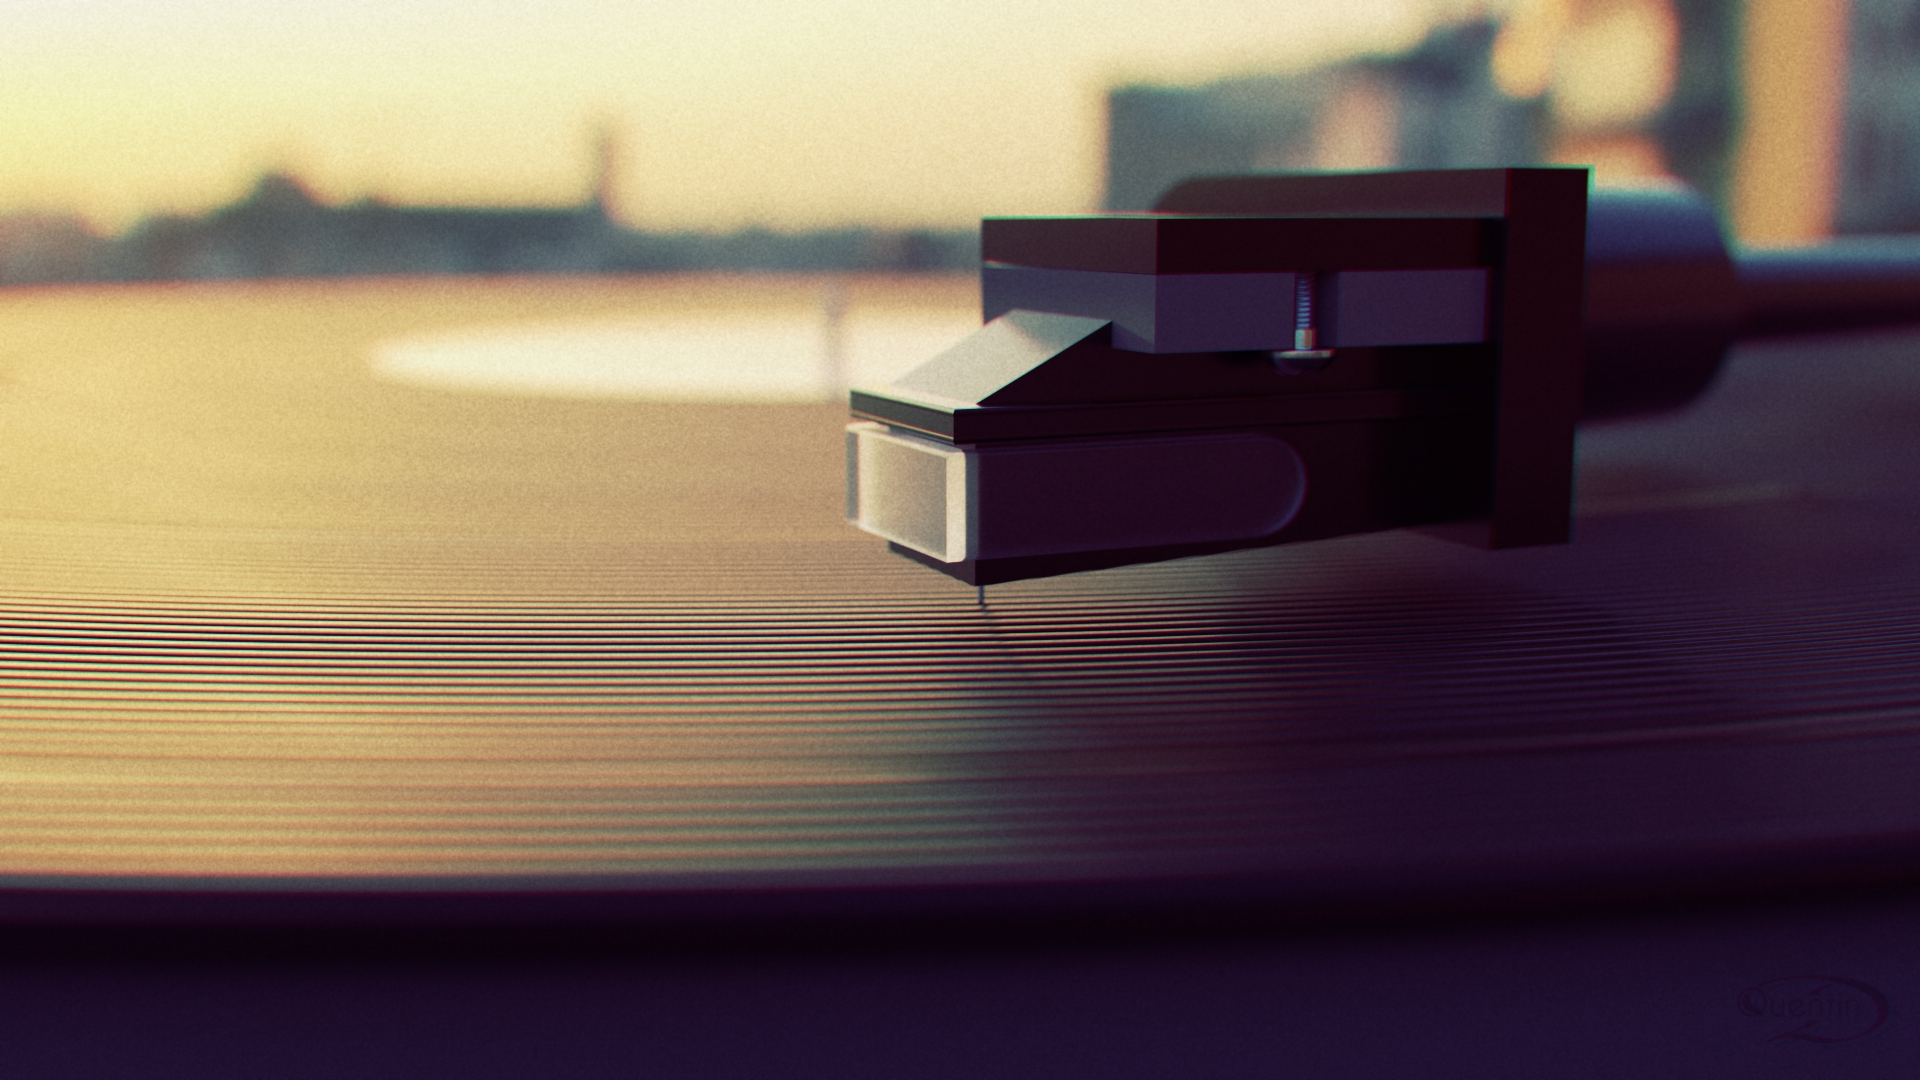 Vinyl Chill Out ChillHop Chillstep Music Music Player Turntables Needles Record Players Closeup 1920x1080